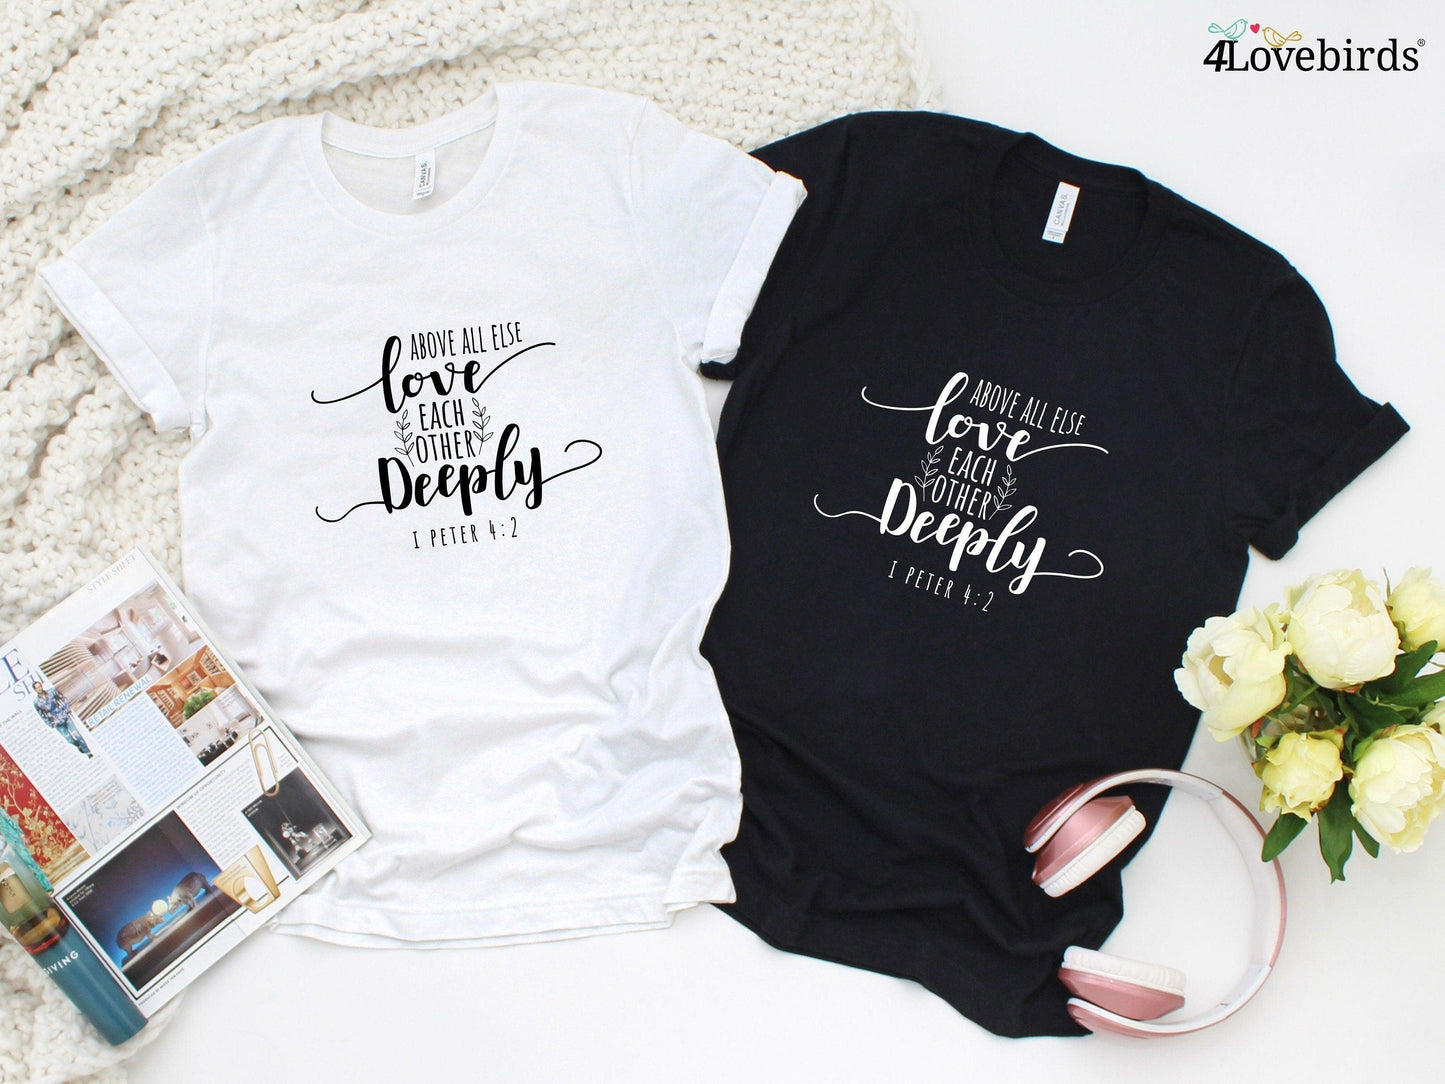 Above all else love each other deeply Hoodie, Lovers T-shirt, Valentine Sweatshirt, Religious Couple Longsleeve, Bible Phrase Tshirt - 4Lovebirds